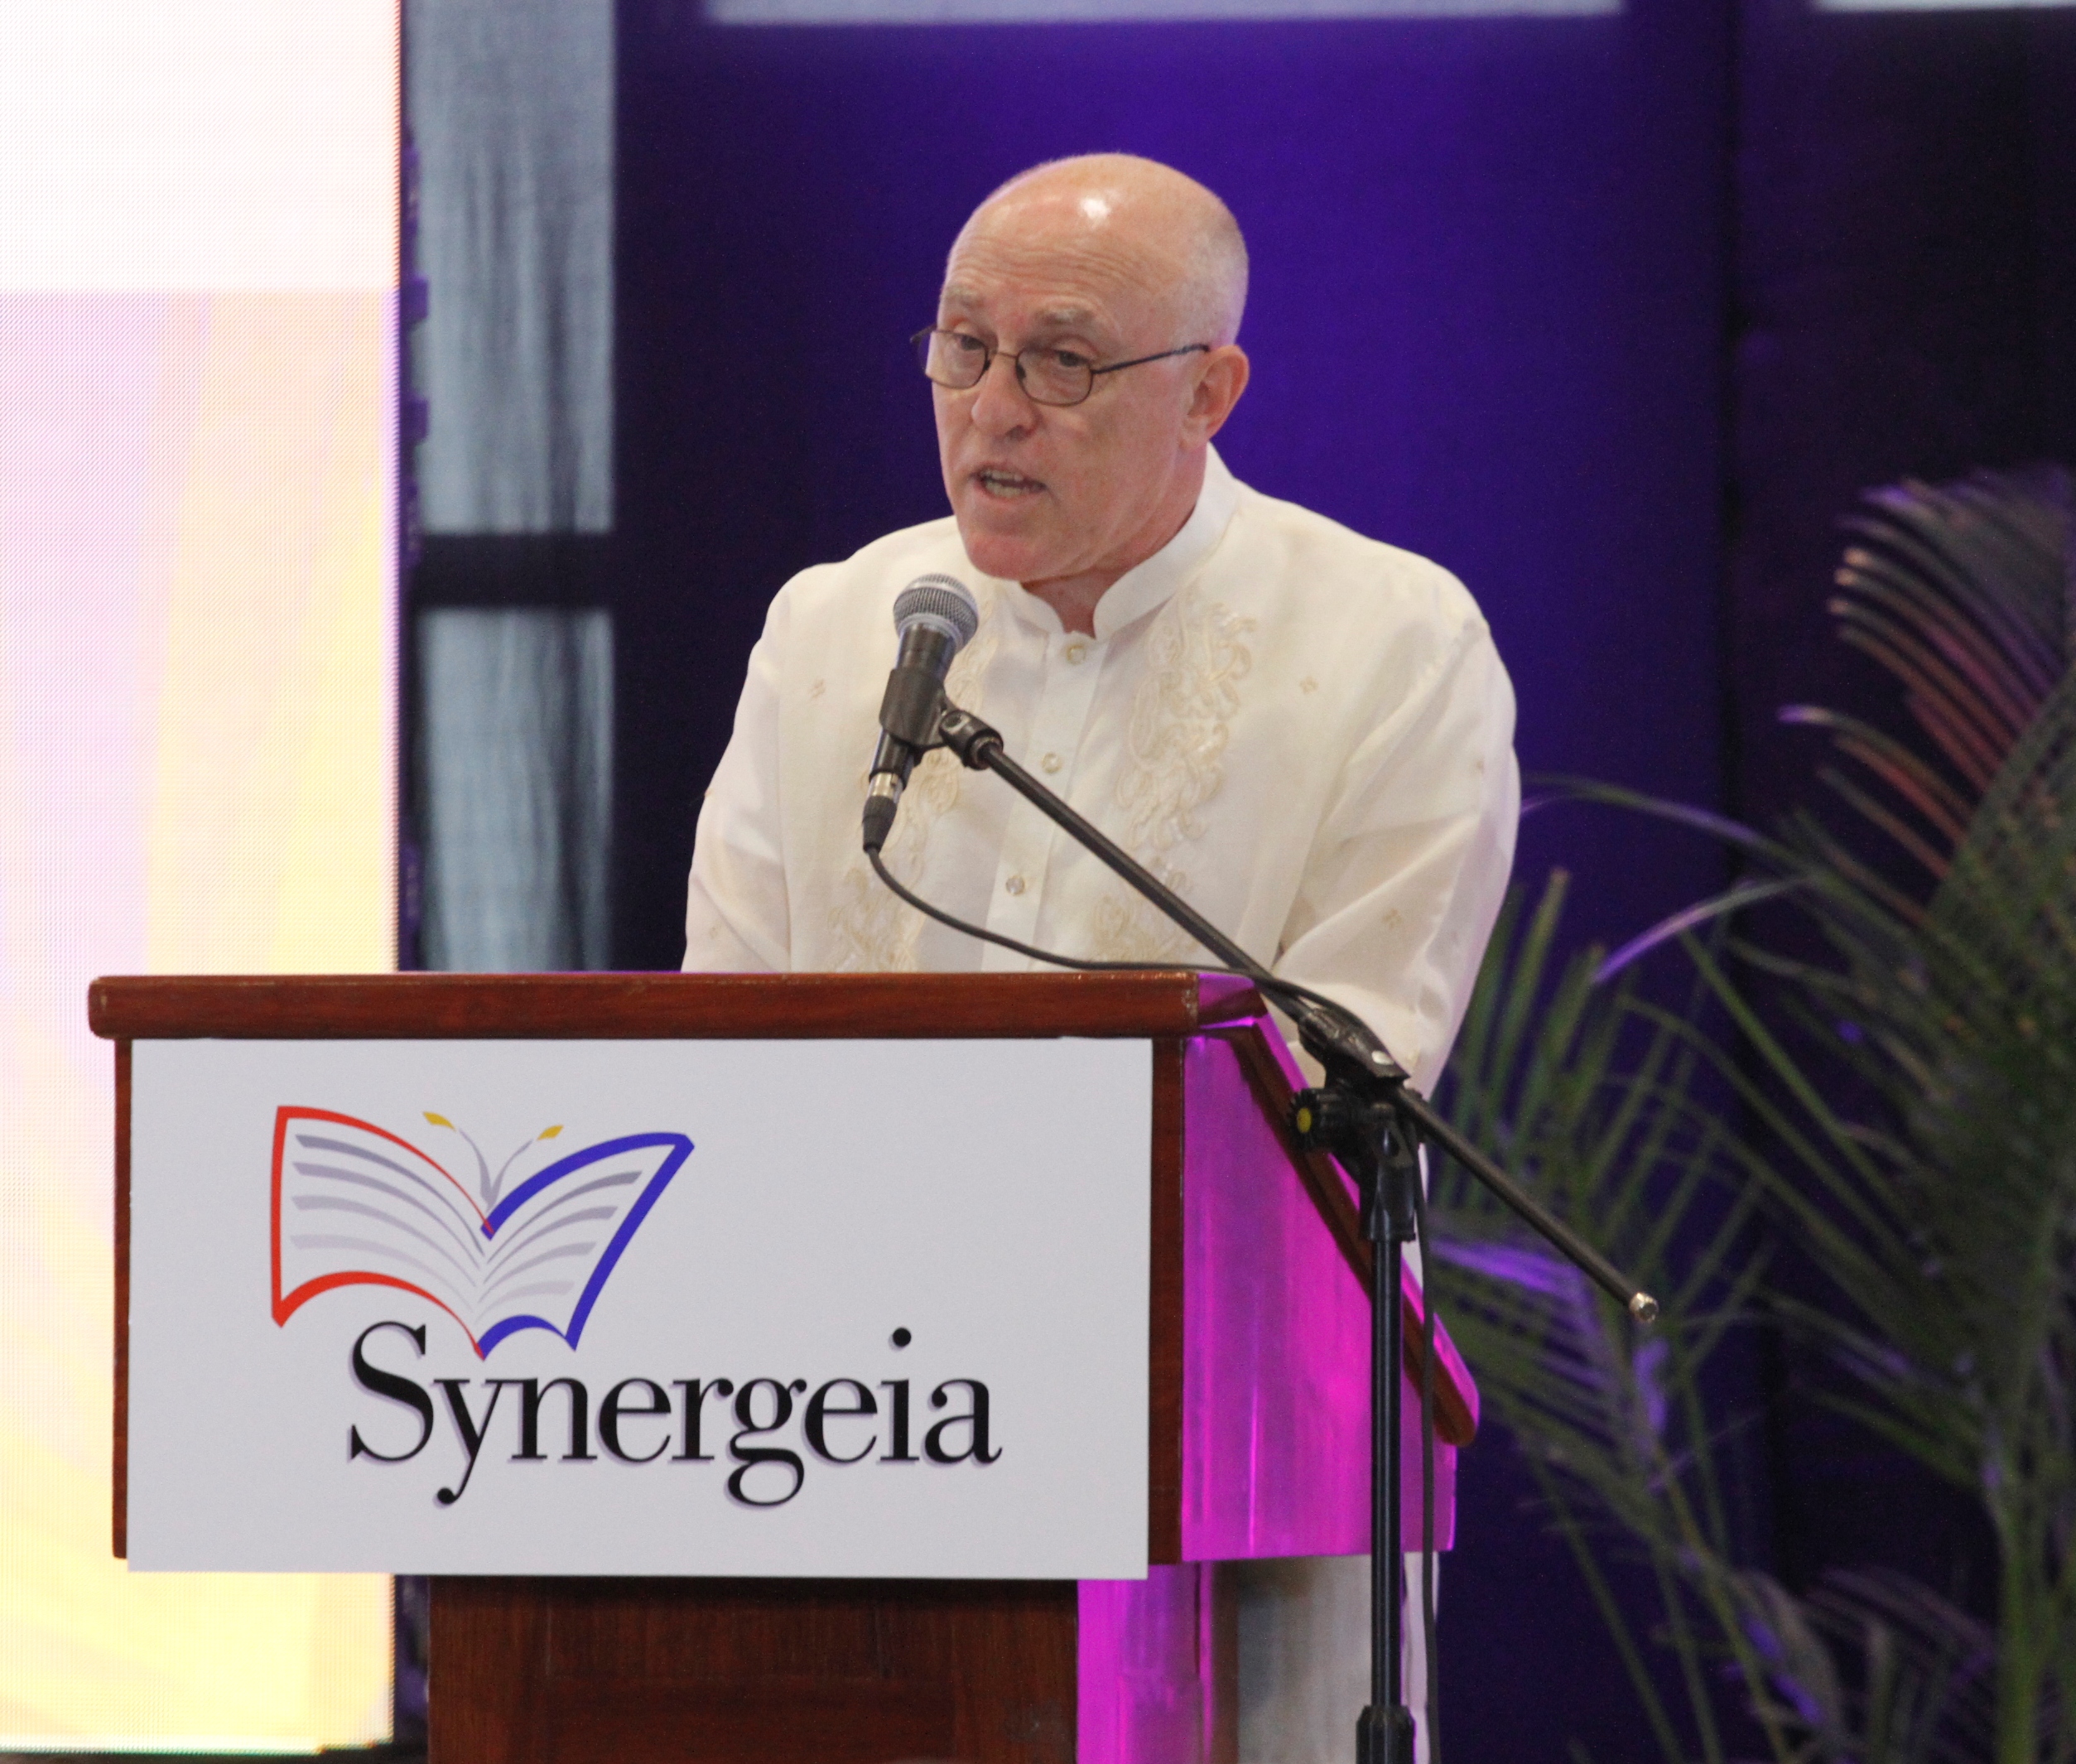 “I celebrate our partnership to improve basic education in the Philippines” – Charge d’Affairs Michael S. Klecheski, Deputy Chief of Mission, U.S. Embassy in the Philippines